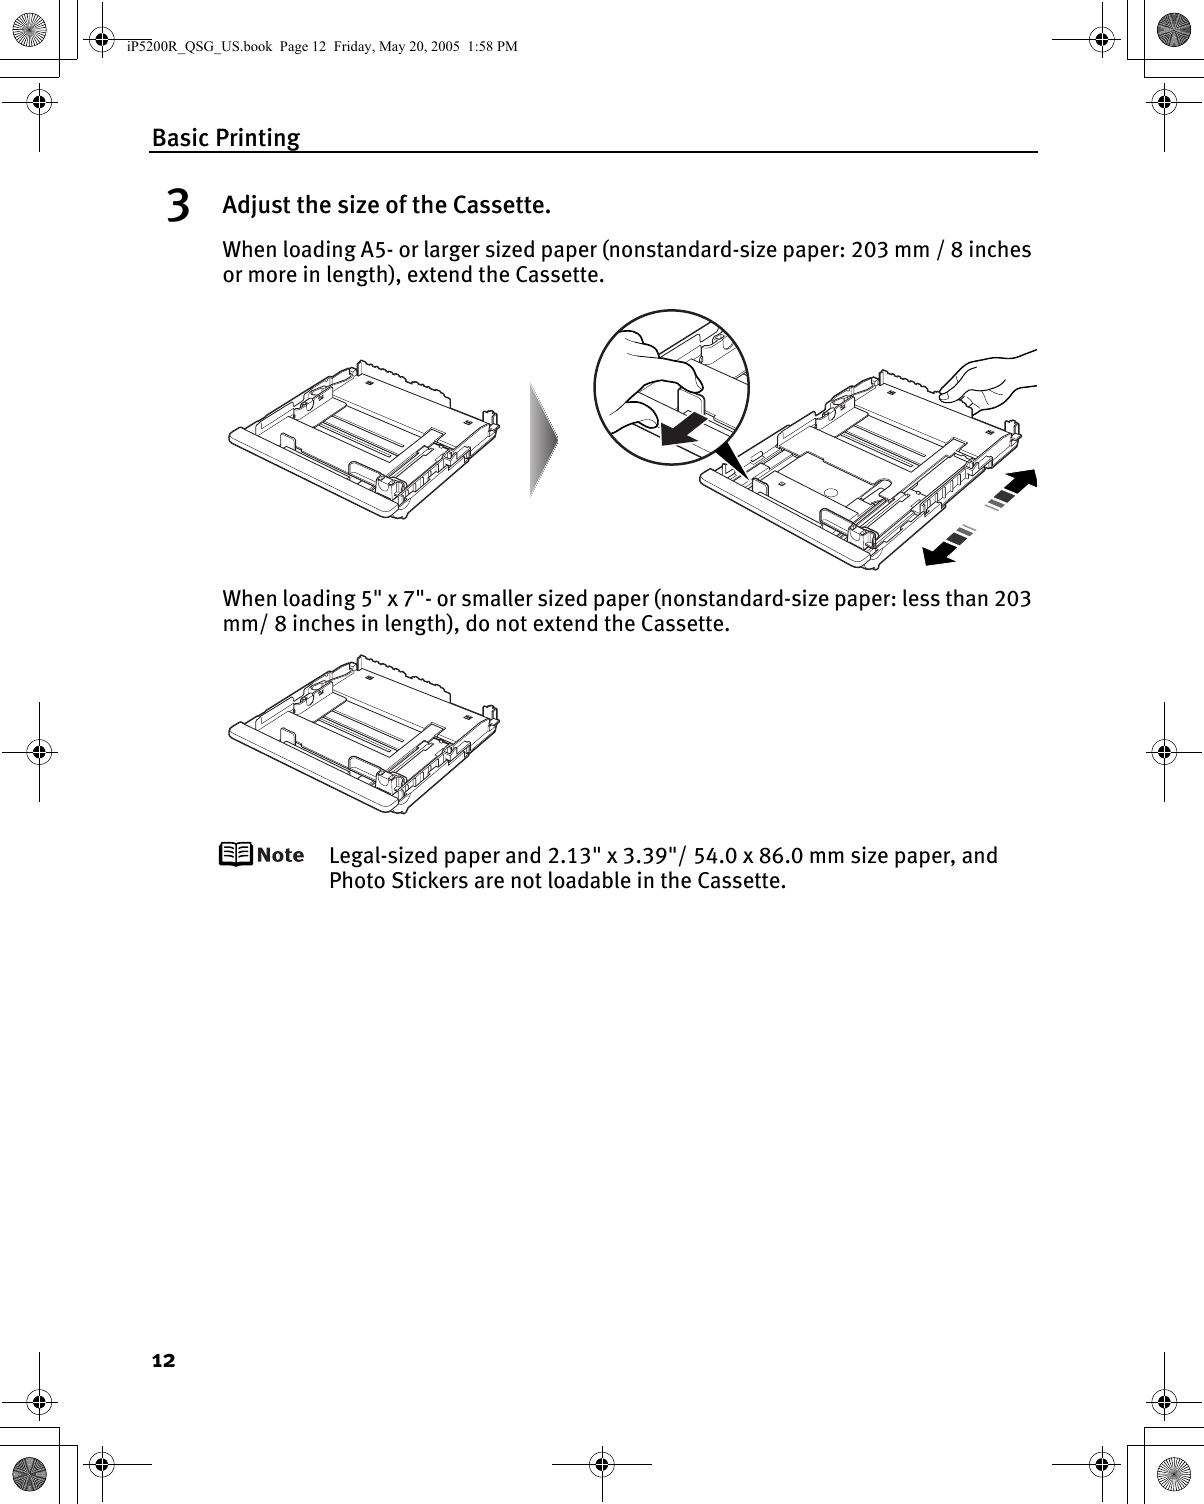 Basic Printing123Adjust the size of the Cassette.When loading A5- or larger sized paper (nonstandard-size paper: 203 mm / 8 inches or more in length), extend the Cassette.When loading 5&quot; x 7&quot;- or smaller sized paper (nonstandard-size paper: less than 203 mm/ 8 inches in length), do not extend the Cassette.Legal-sized paper and 2.13&quot; x 3.39&quot;/ 54.0 x 86.0 mm size paper, and Photo Stickers are not loadable in the Cassette.iP5200R_QSG_US.book  Page 12  Friday, May 20, 2005  1:58 PM